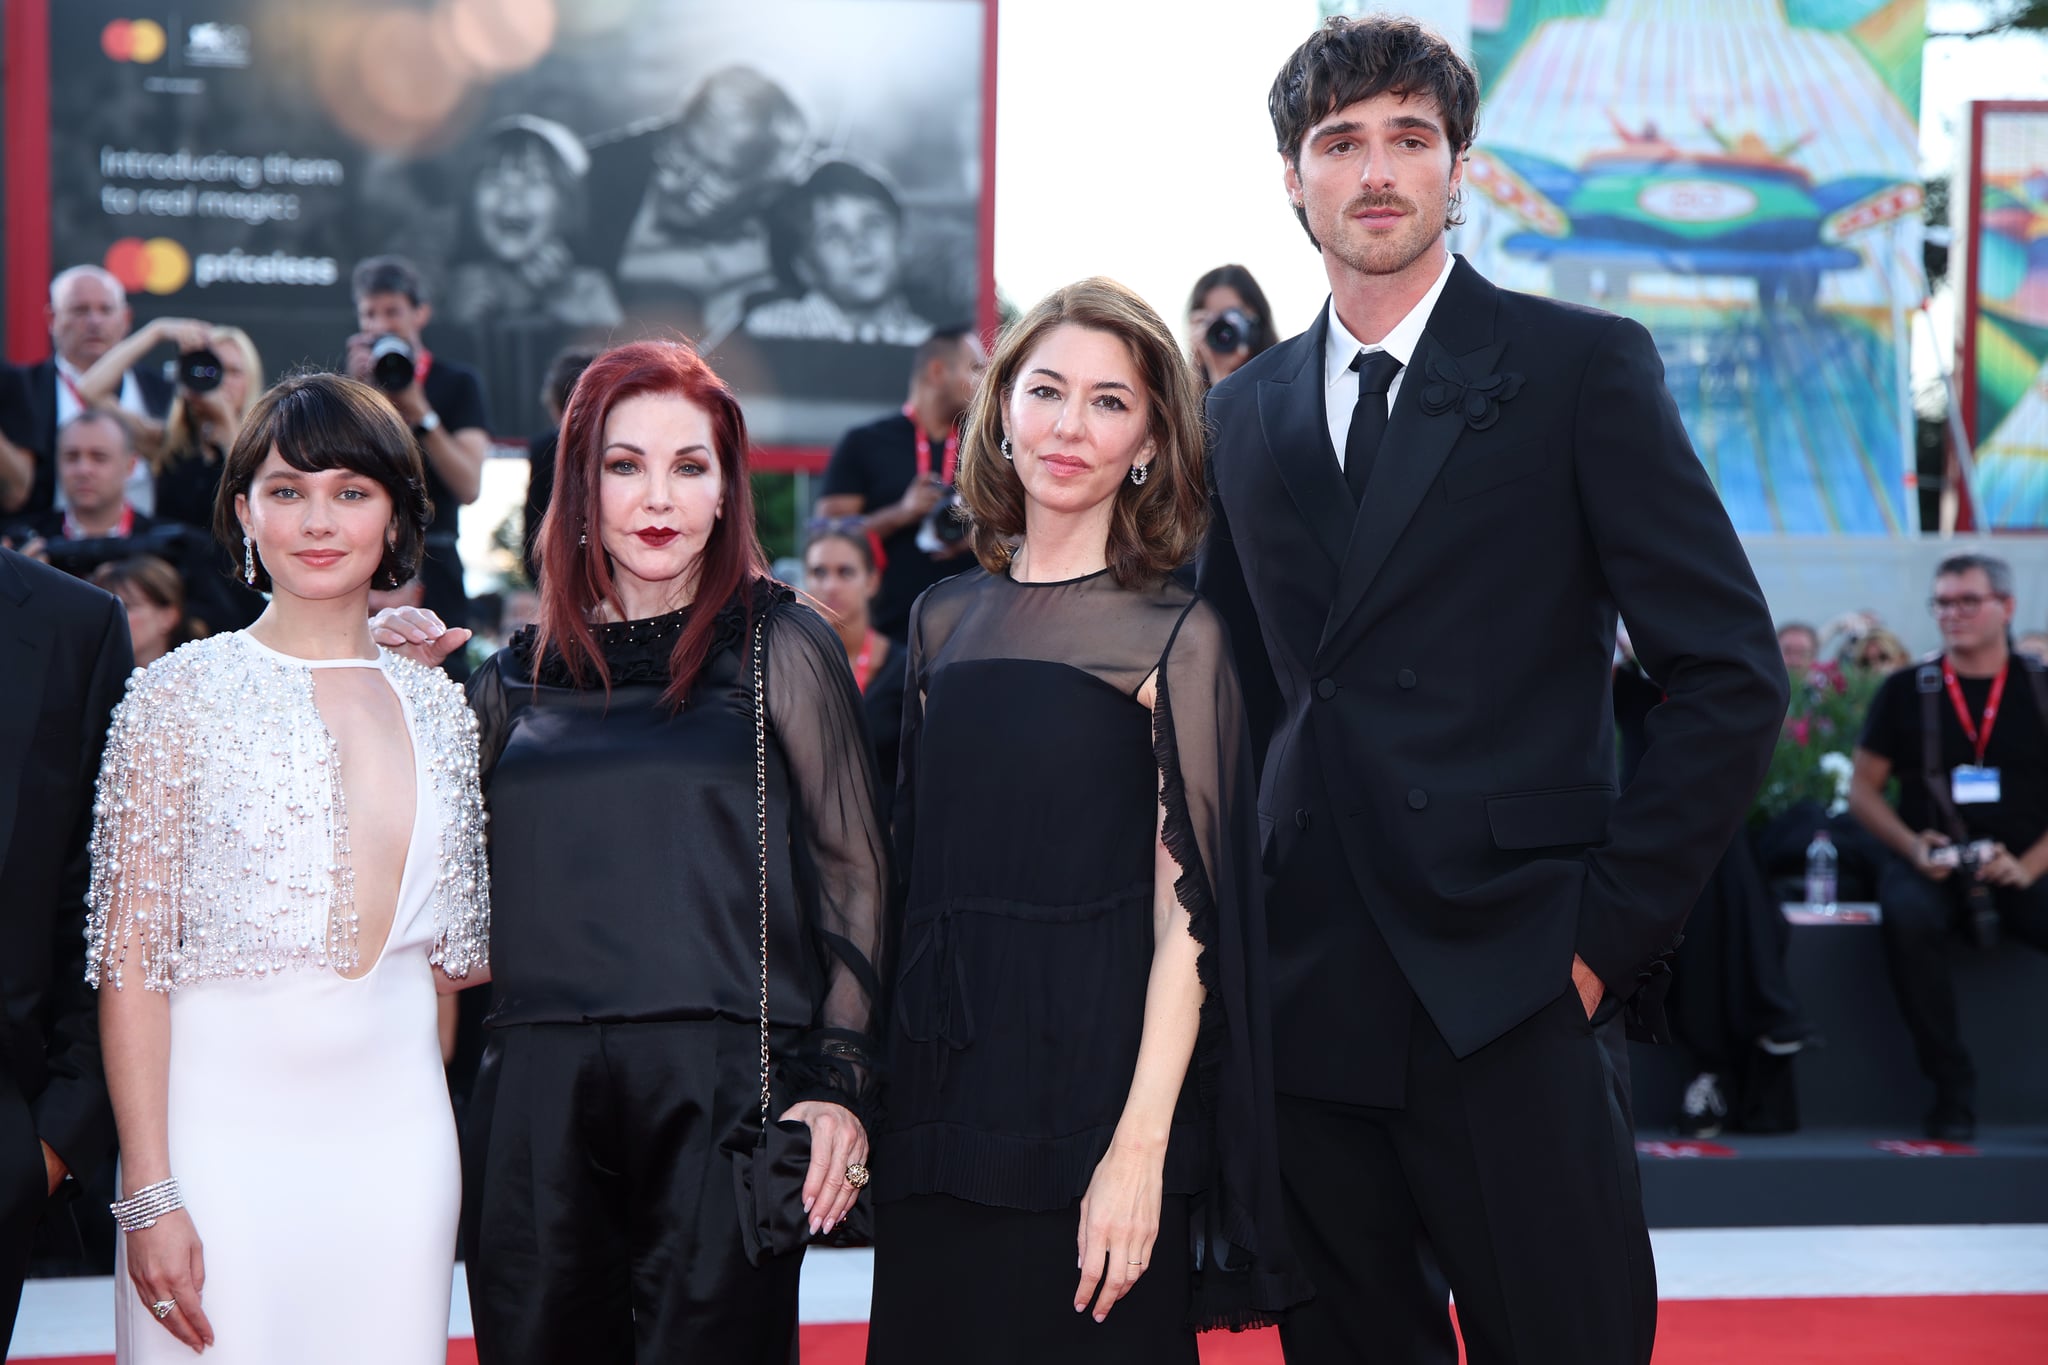  Cailee Spaeny, Priscilla Presley, Sofia Coppola and Jacob Elordi attend a red carpet for the movie